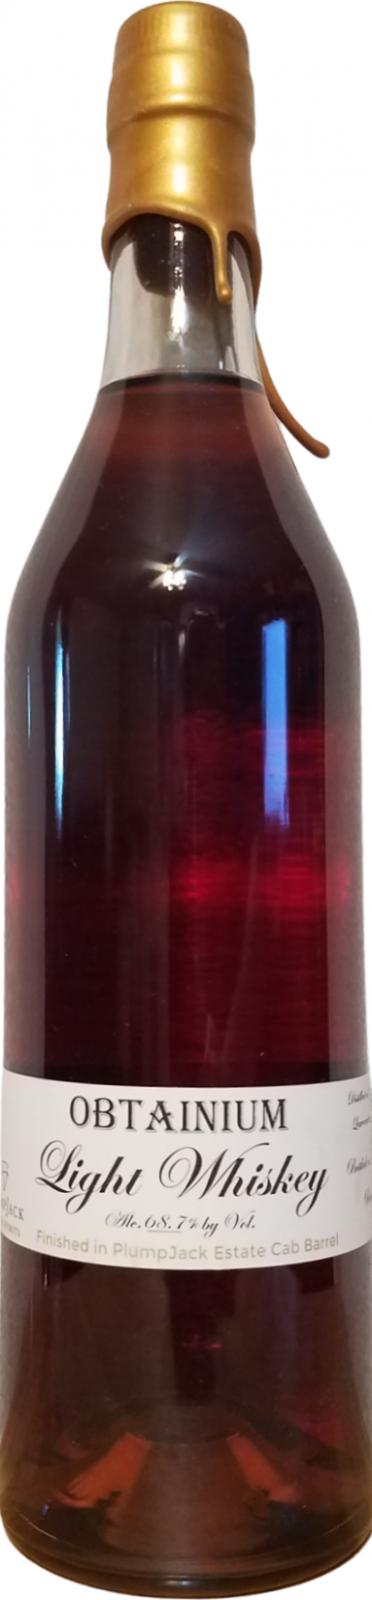 Obtainium 2007 Gold Wax Finished in Plumpjack Estate Cab WB-0008 Plumpjack Wine and Spirits 68.7% 750ml